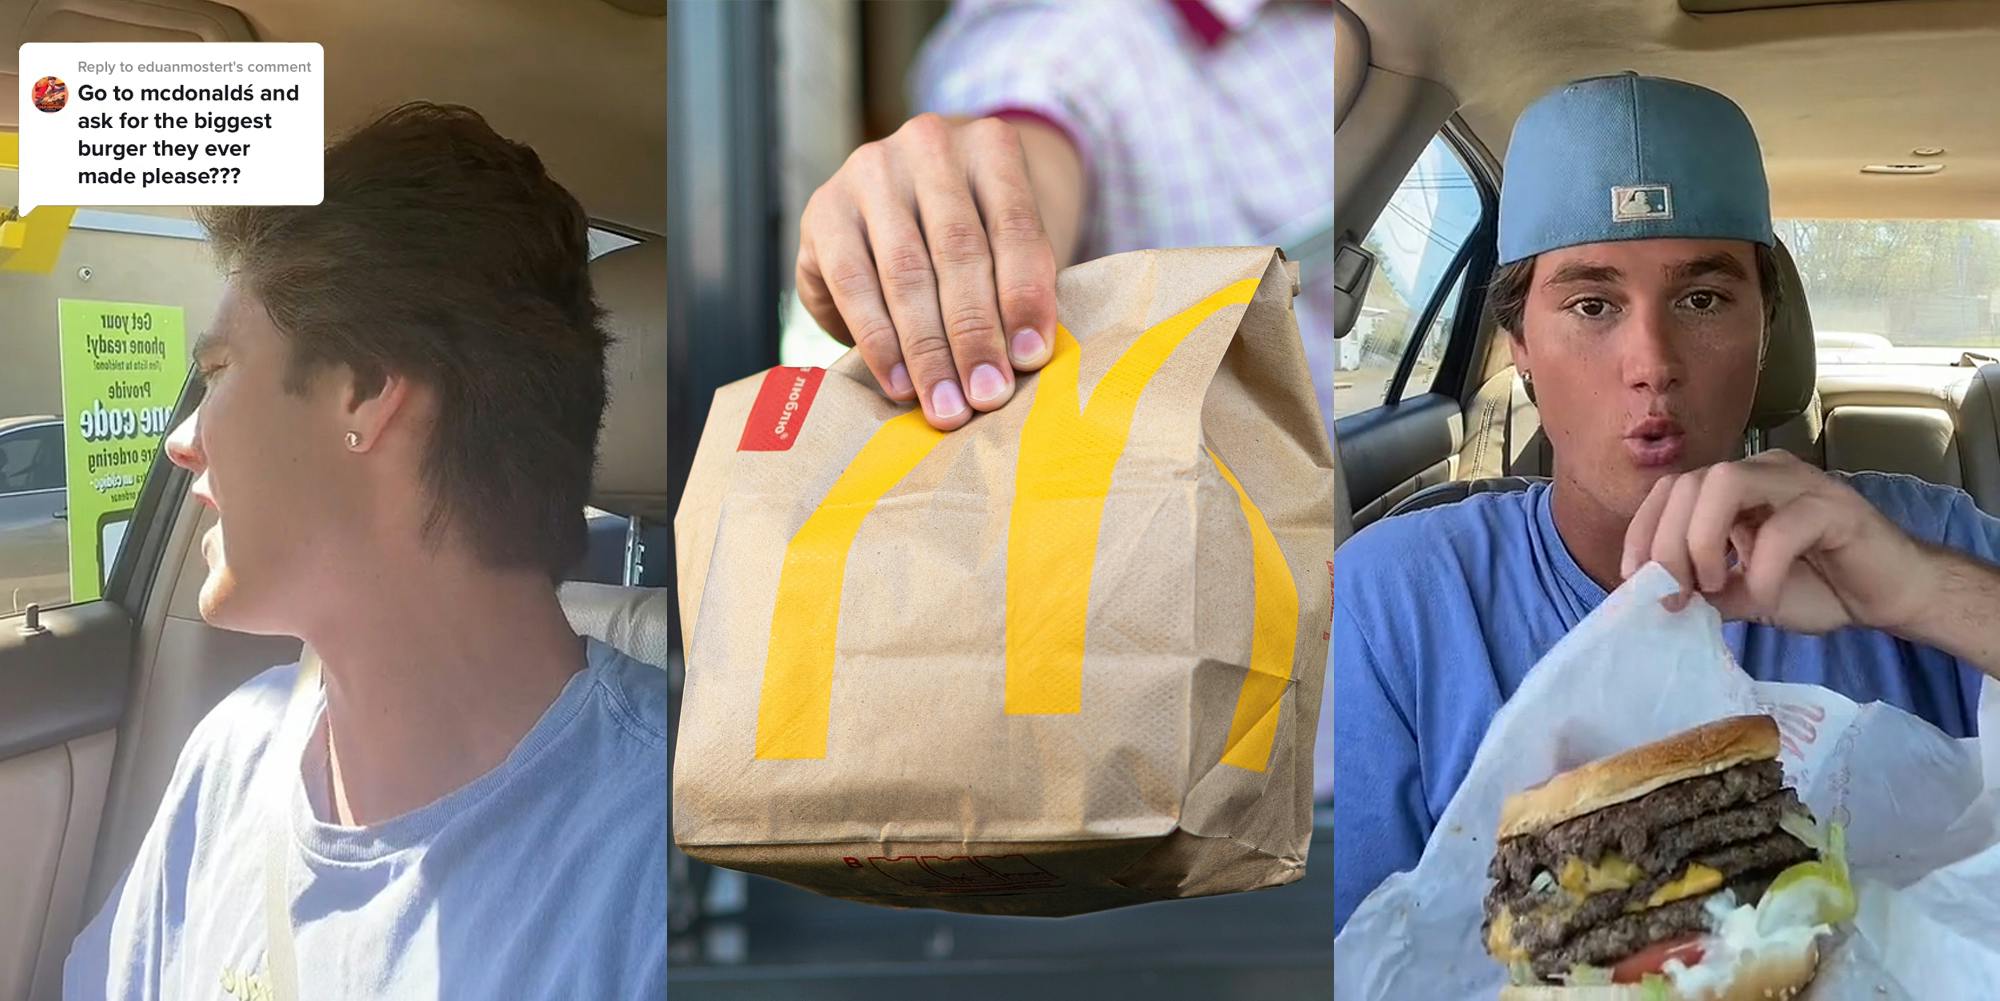 Man speaking to McDonald's employee through order speaker at drive thru caption "Go to mcdonald's and ask for the biggest burger they ever made please???" (l) McDonald's drive thru window employee handing customer bag (c) Man opening up massive McDonald's burger in car (r)